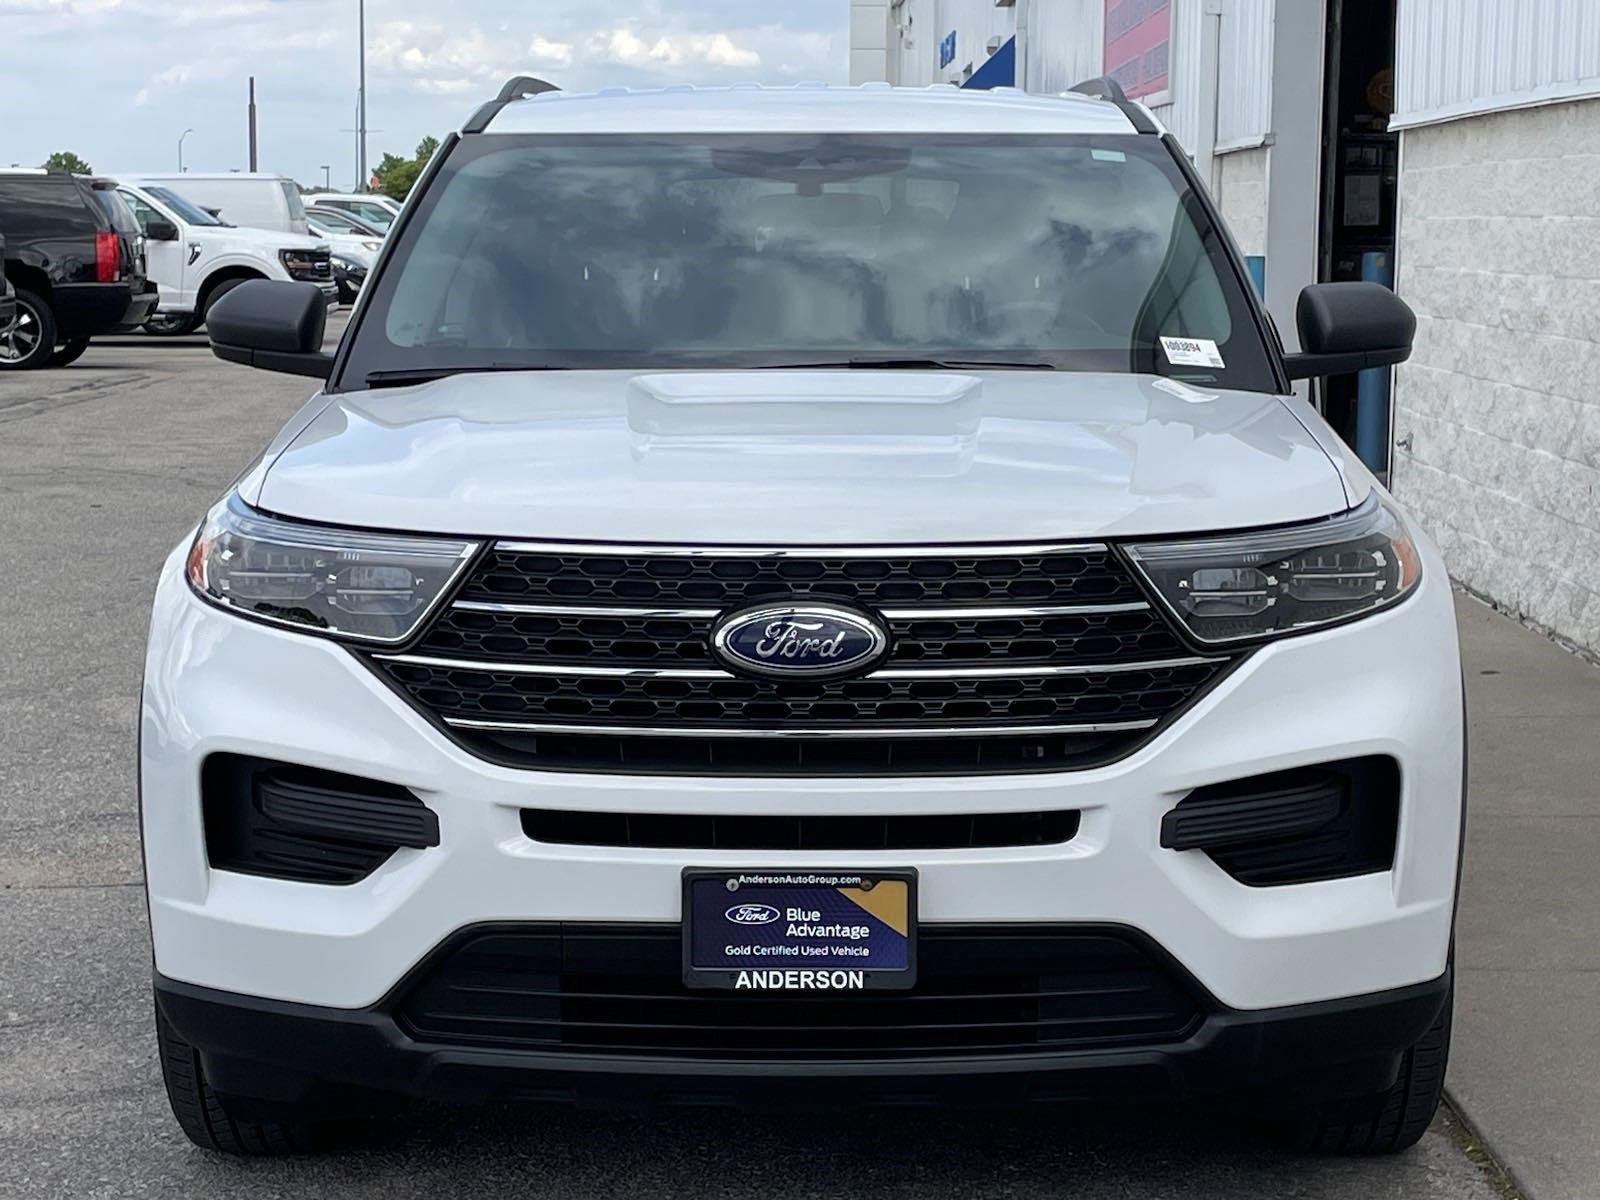 Used 2022 Ford Explorer XLT SUV for sale in Lincoln NE